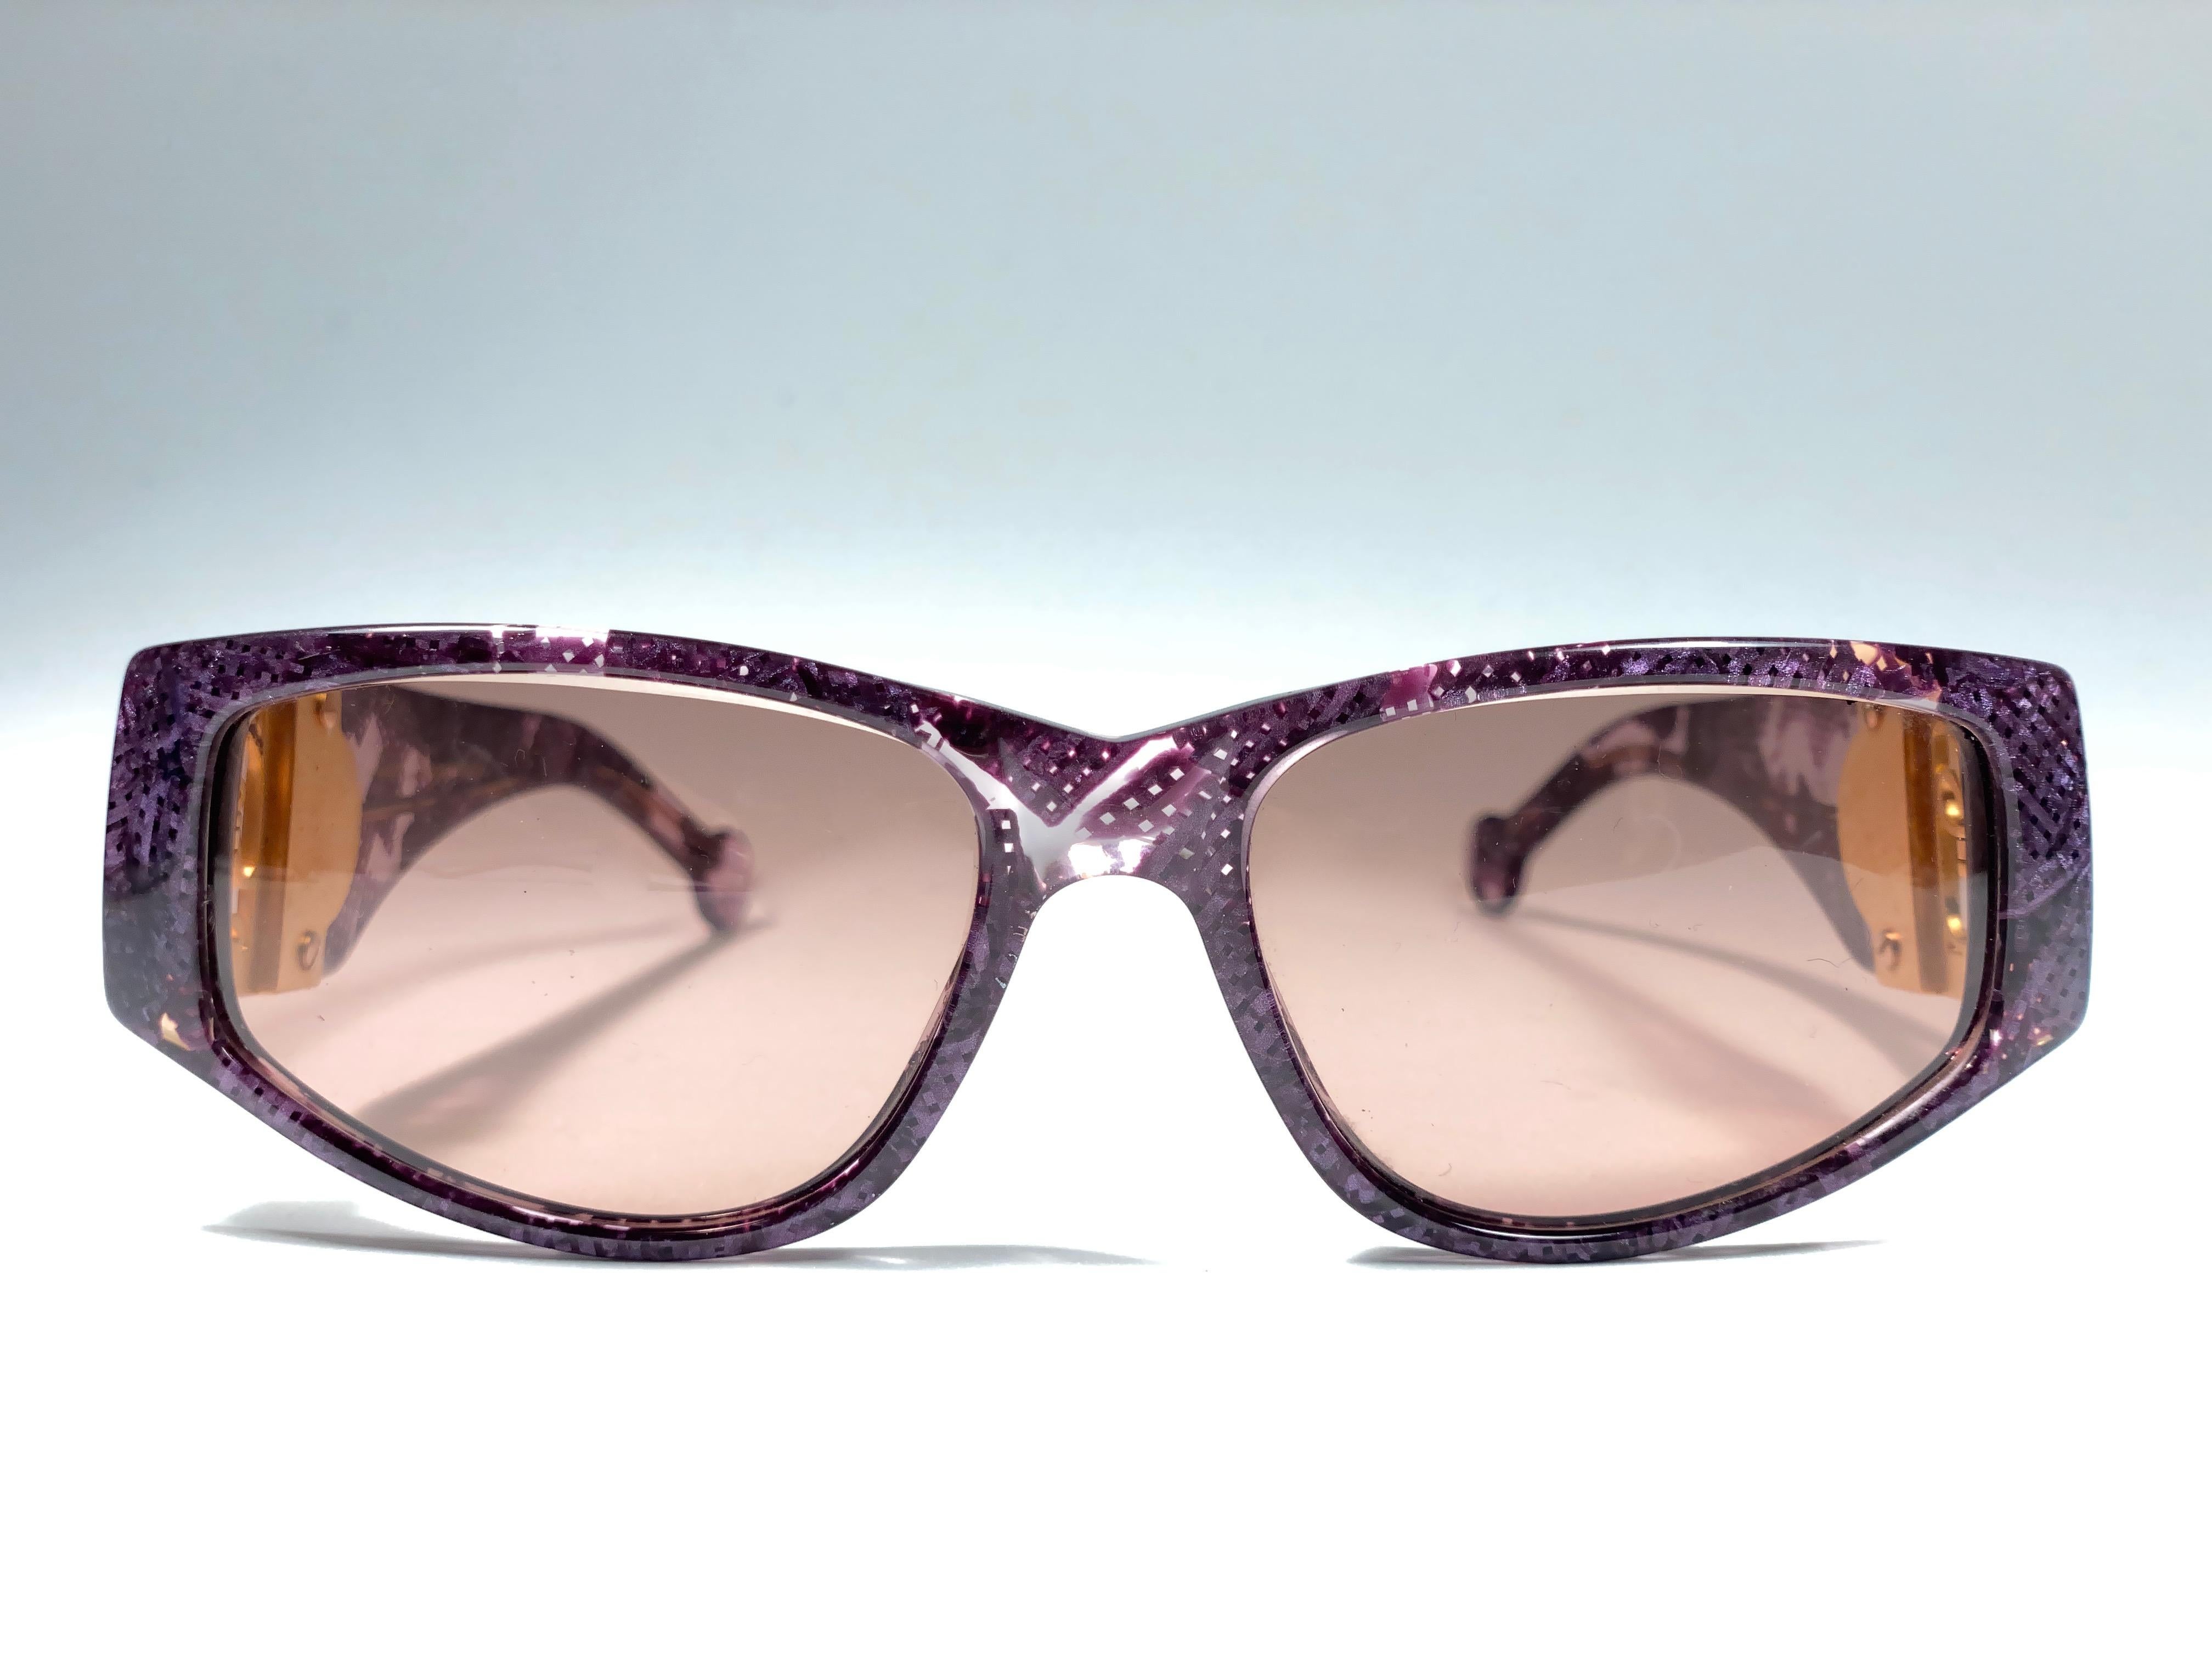 Amazing pair of vintage 1980's Karl Lagerfeld gold & fuchsia mosaic sunglasses framing a pair of amber lenses.
 
This pair may show minor sign of wear due to storage. A true fashion statement .